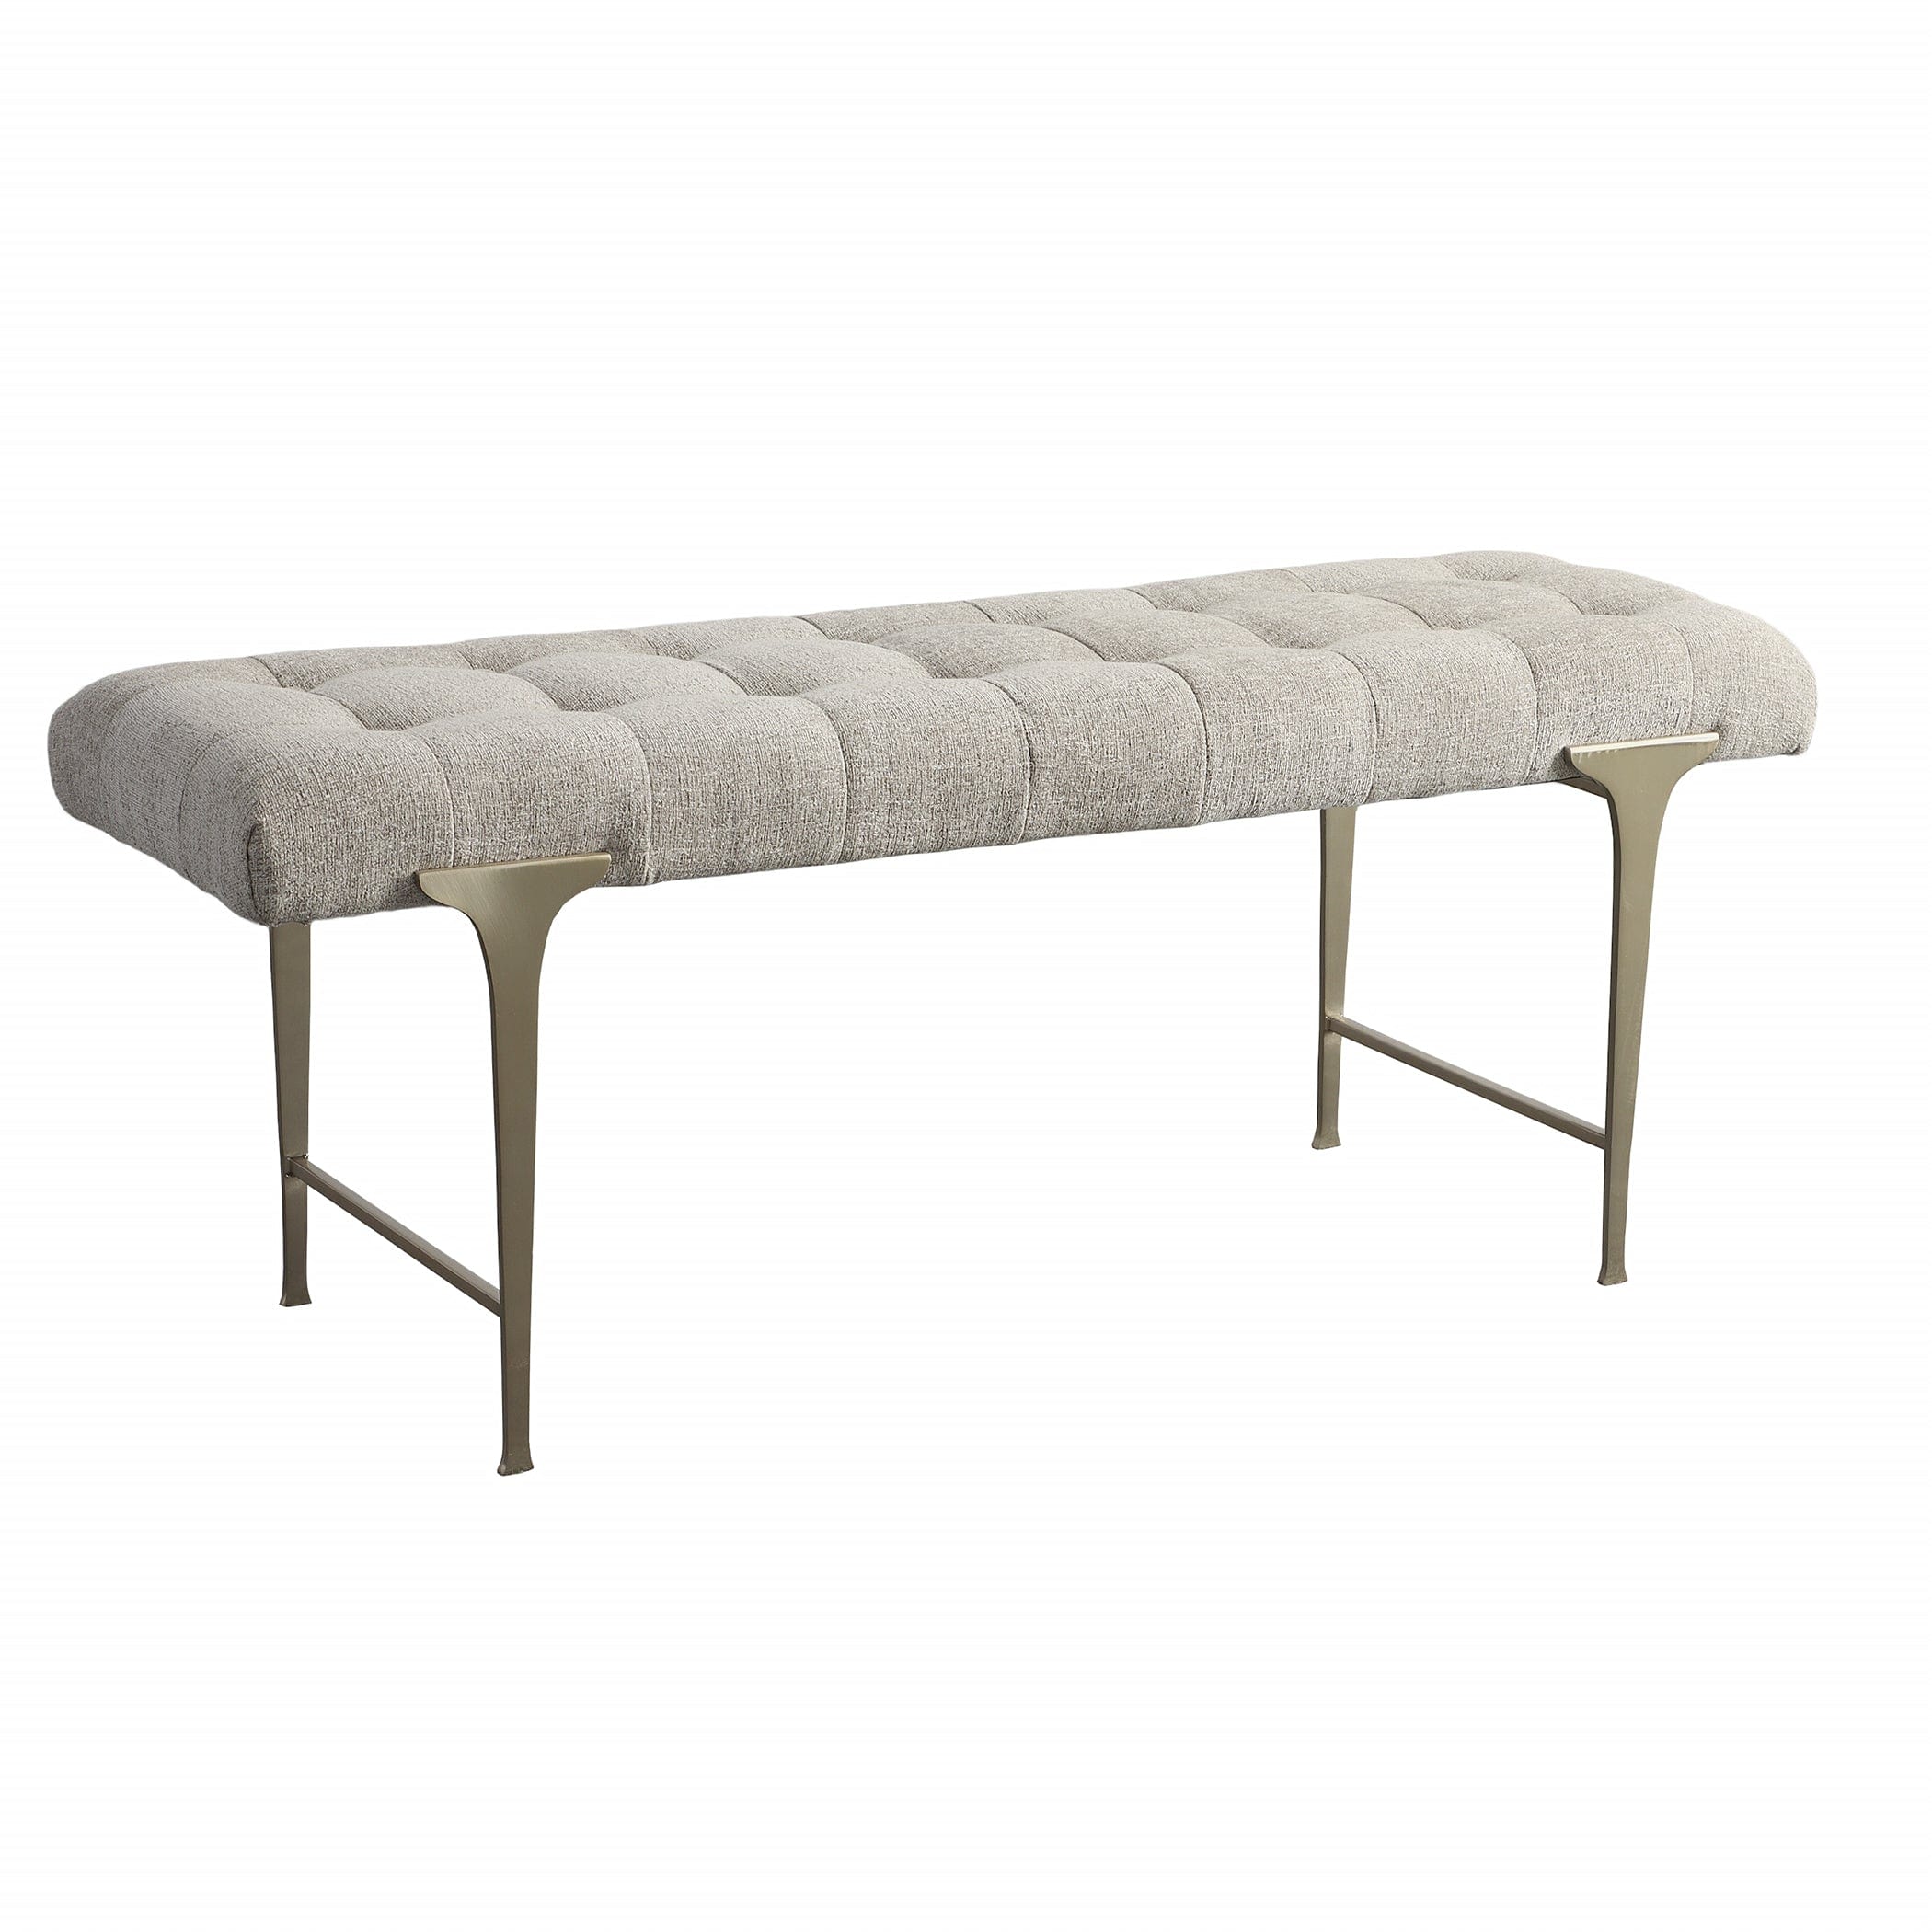 Imperial Upholstered Gray Bench Uttermost